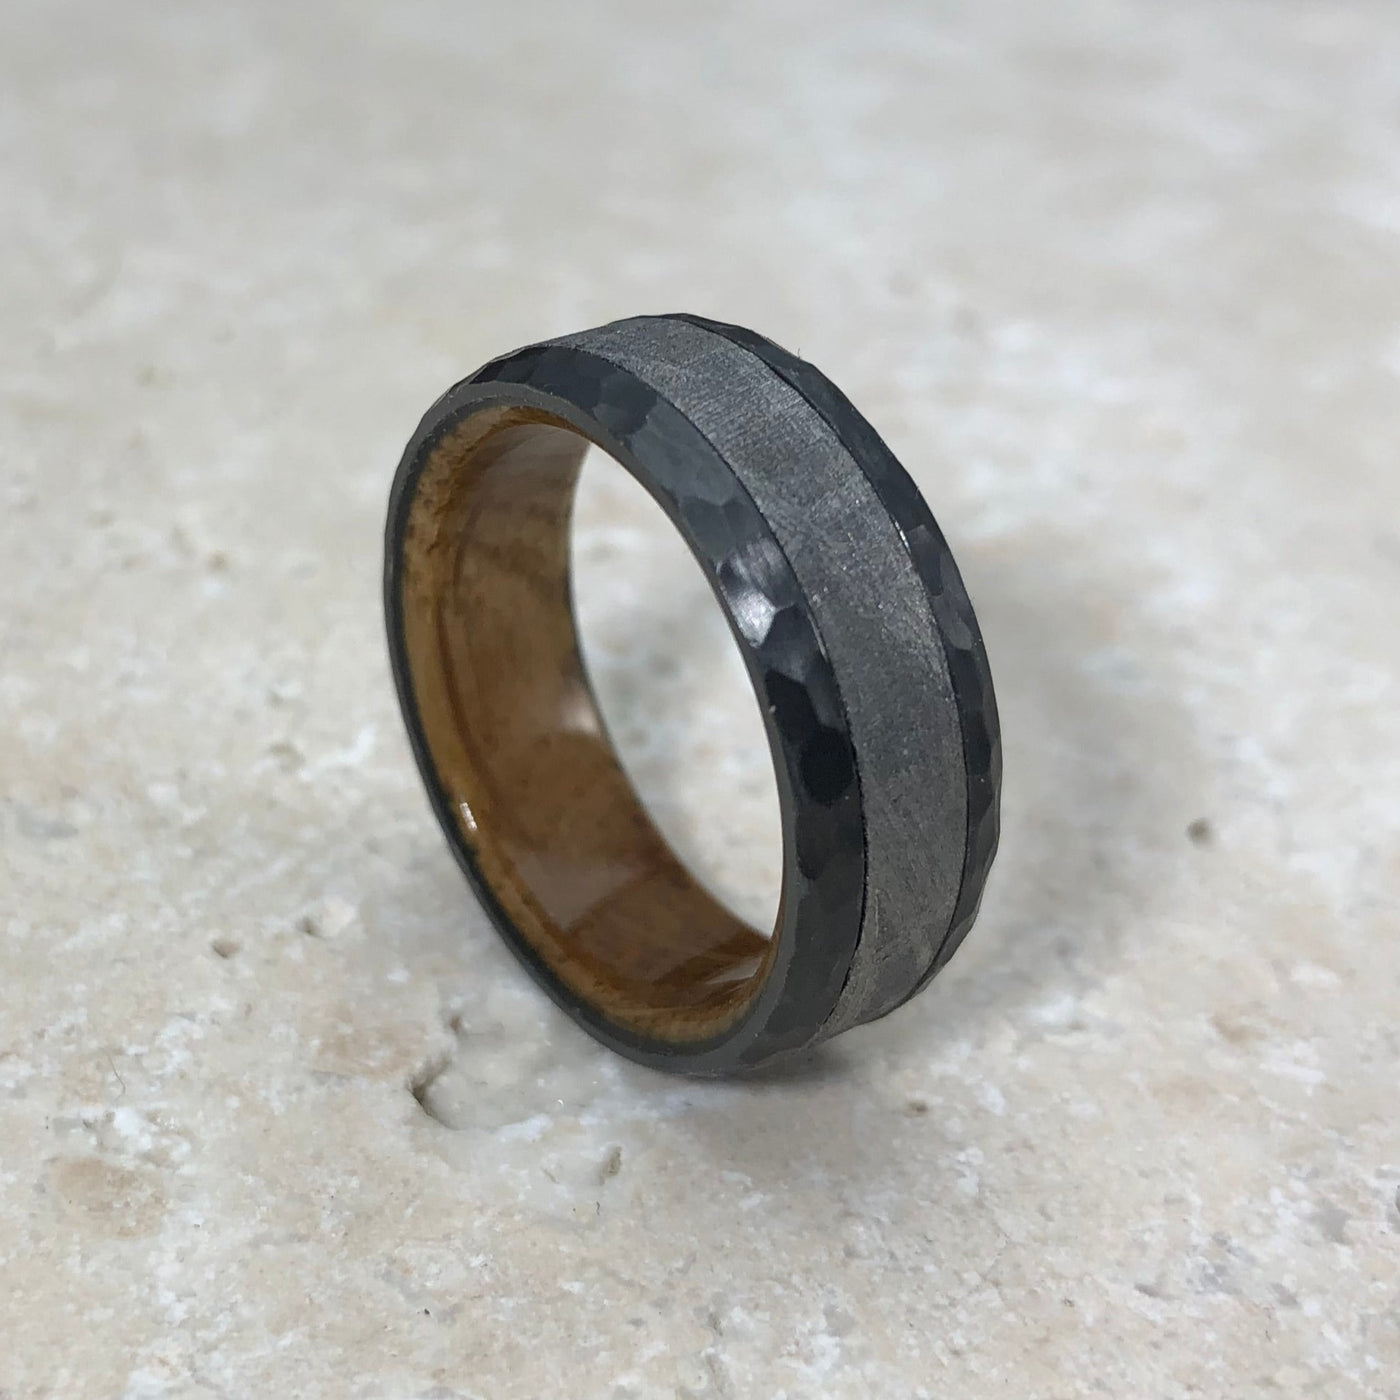 Meteorite Inlay Zirconium Ring With Wood Sleeve and hammered finish